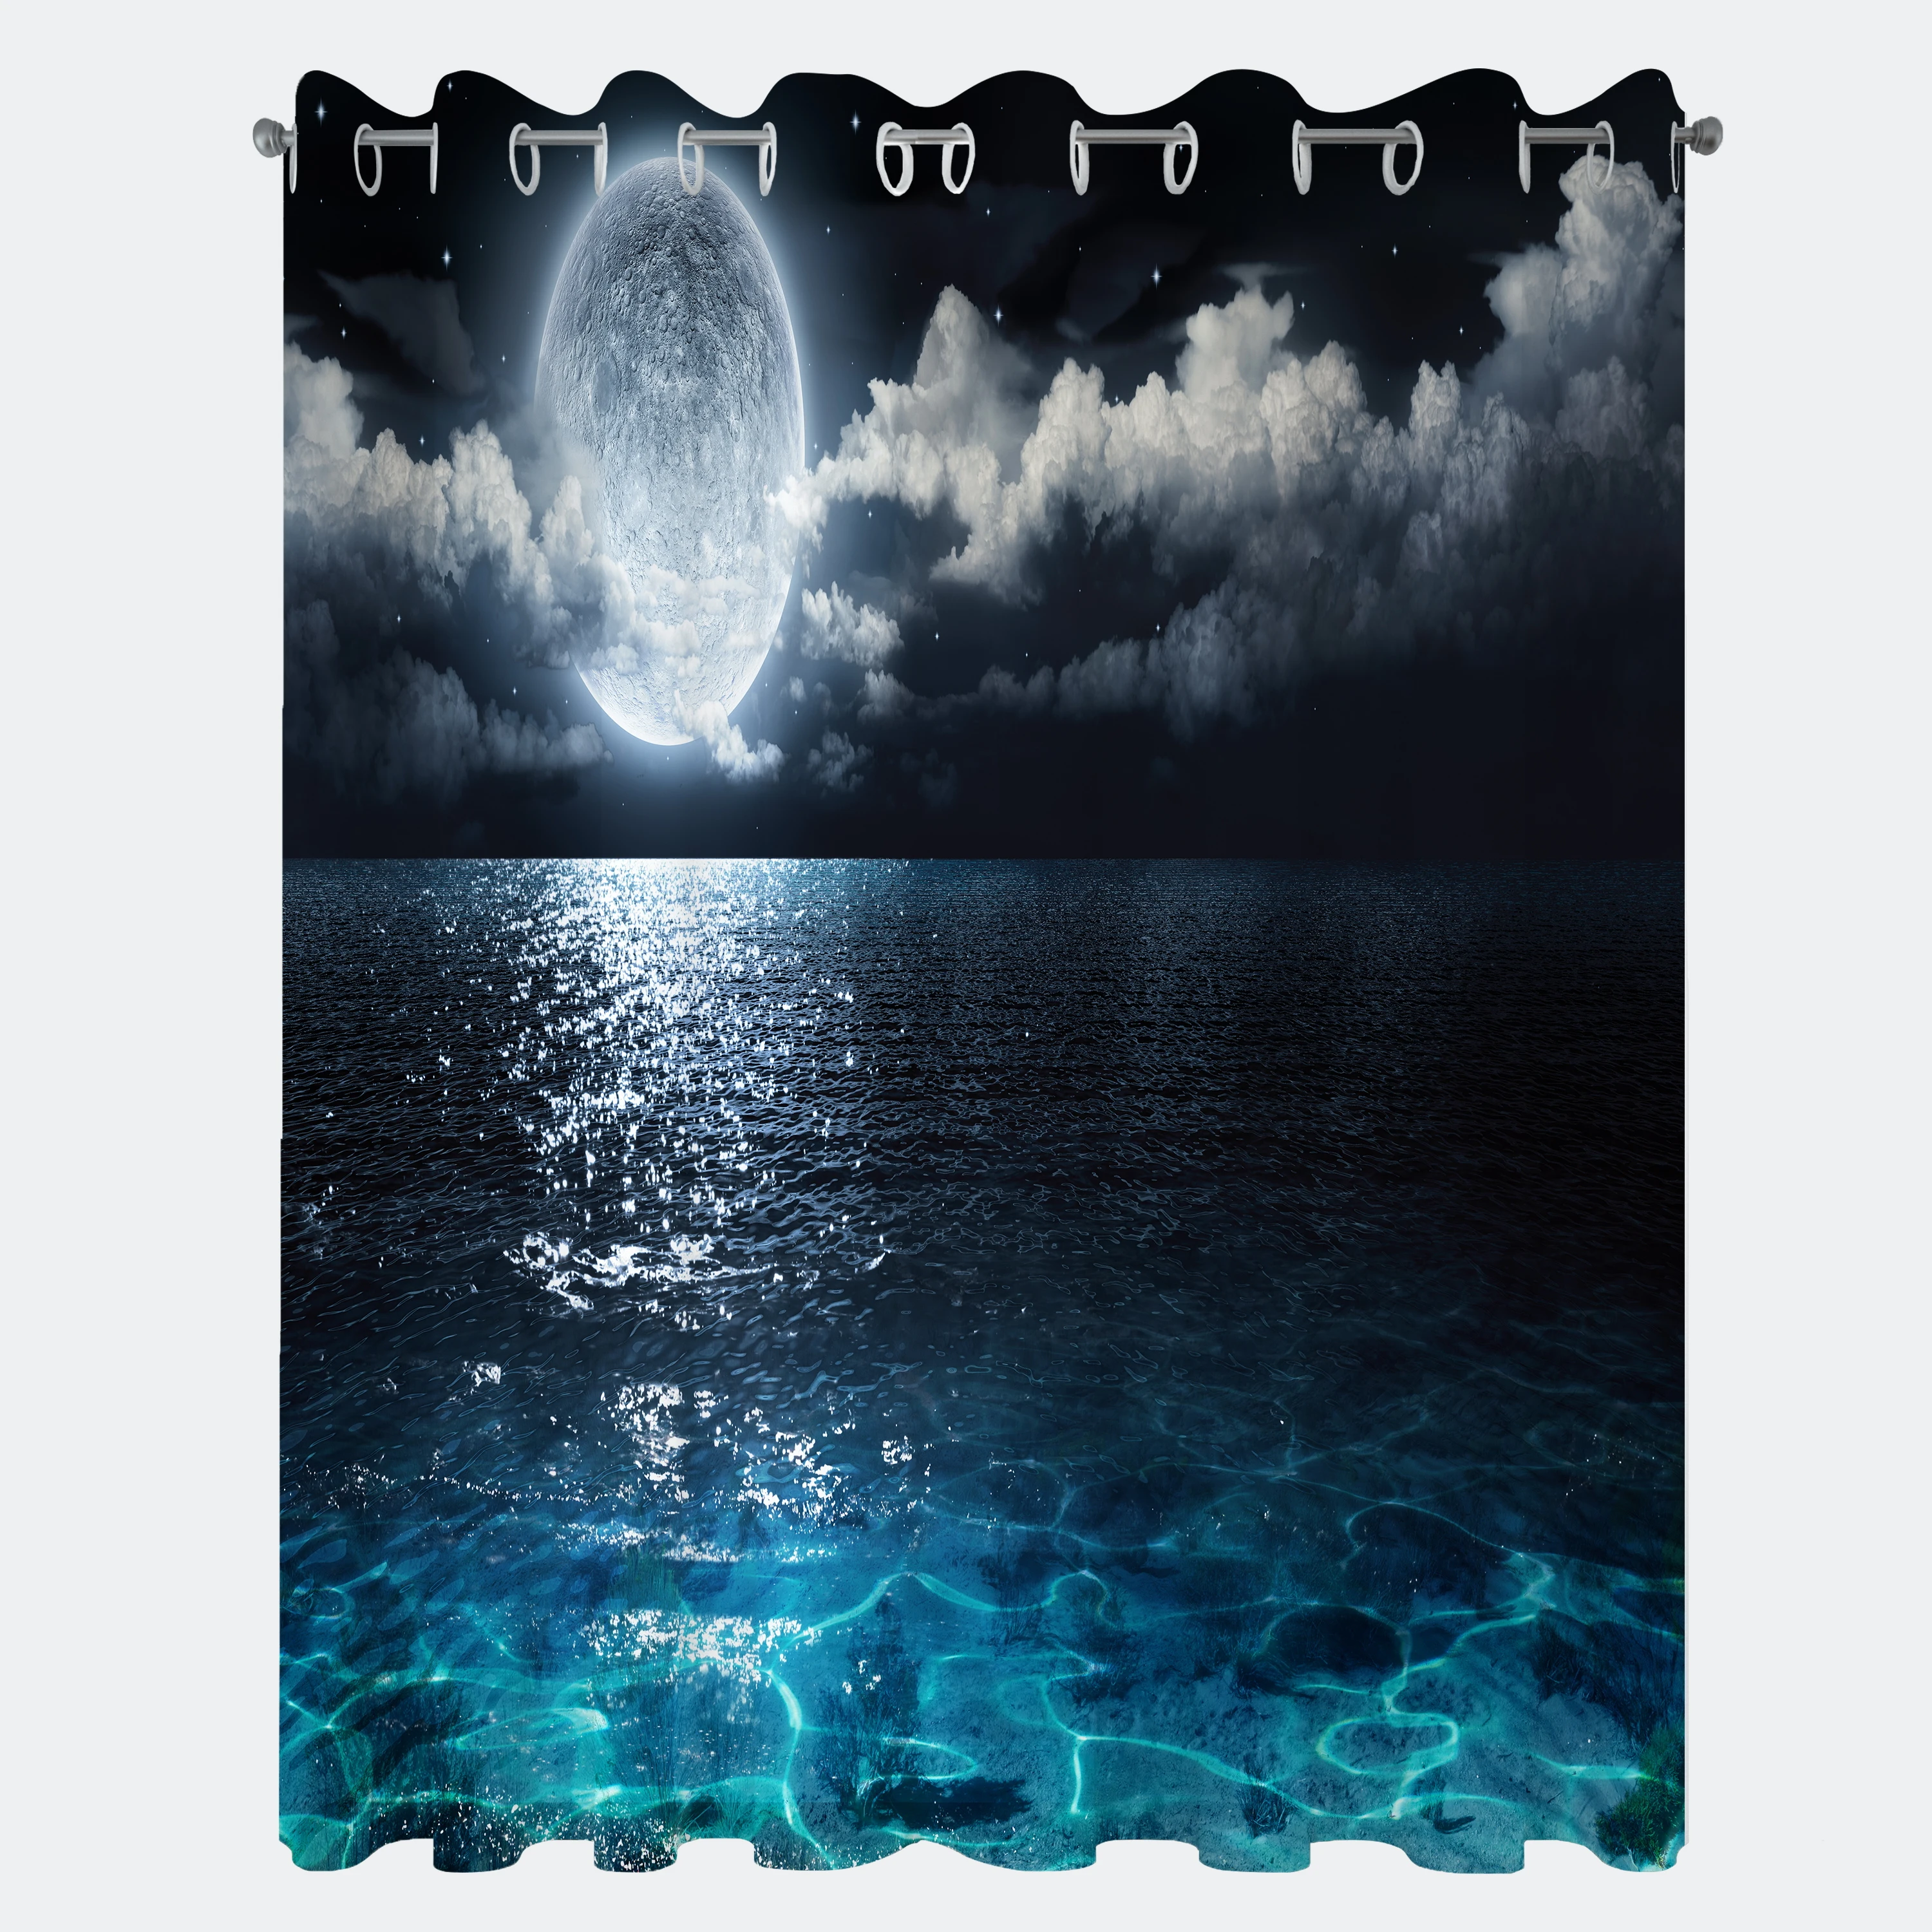 

Night Sky Curtains Full Moon and Foggy Clouds with Turquoise Glass Like Sea Ocean Print Living Room Bedroom Window Curtain Blue